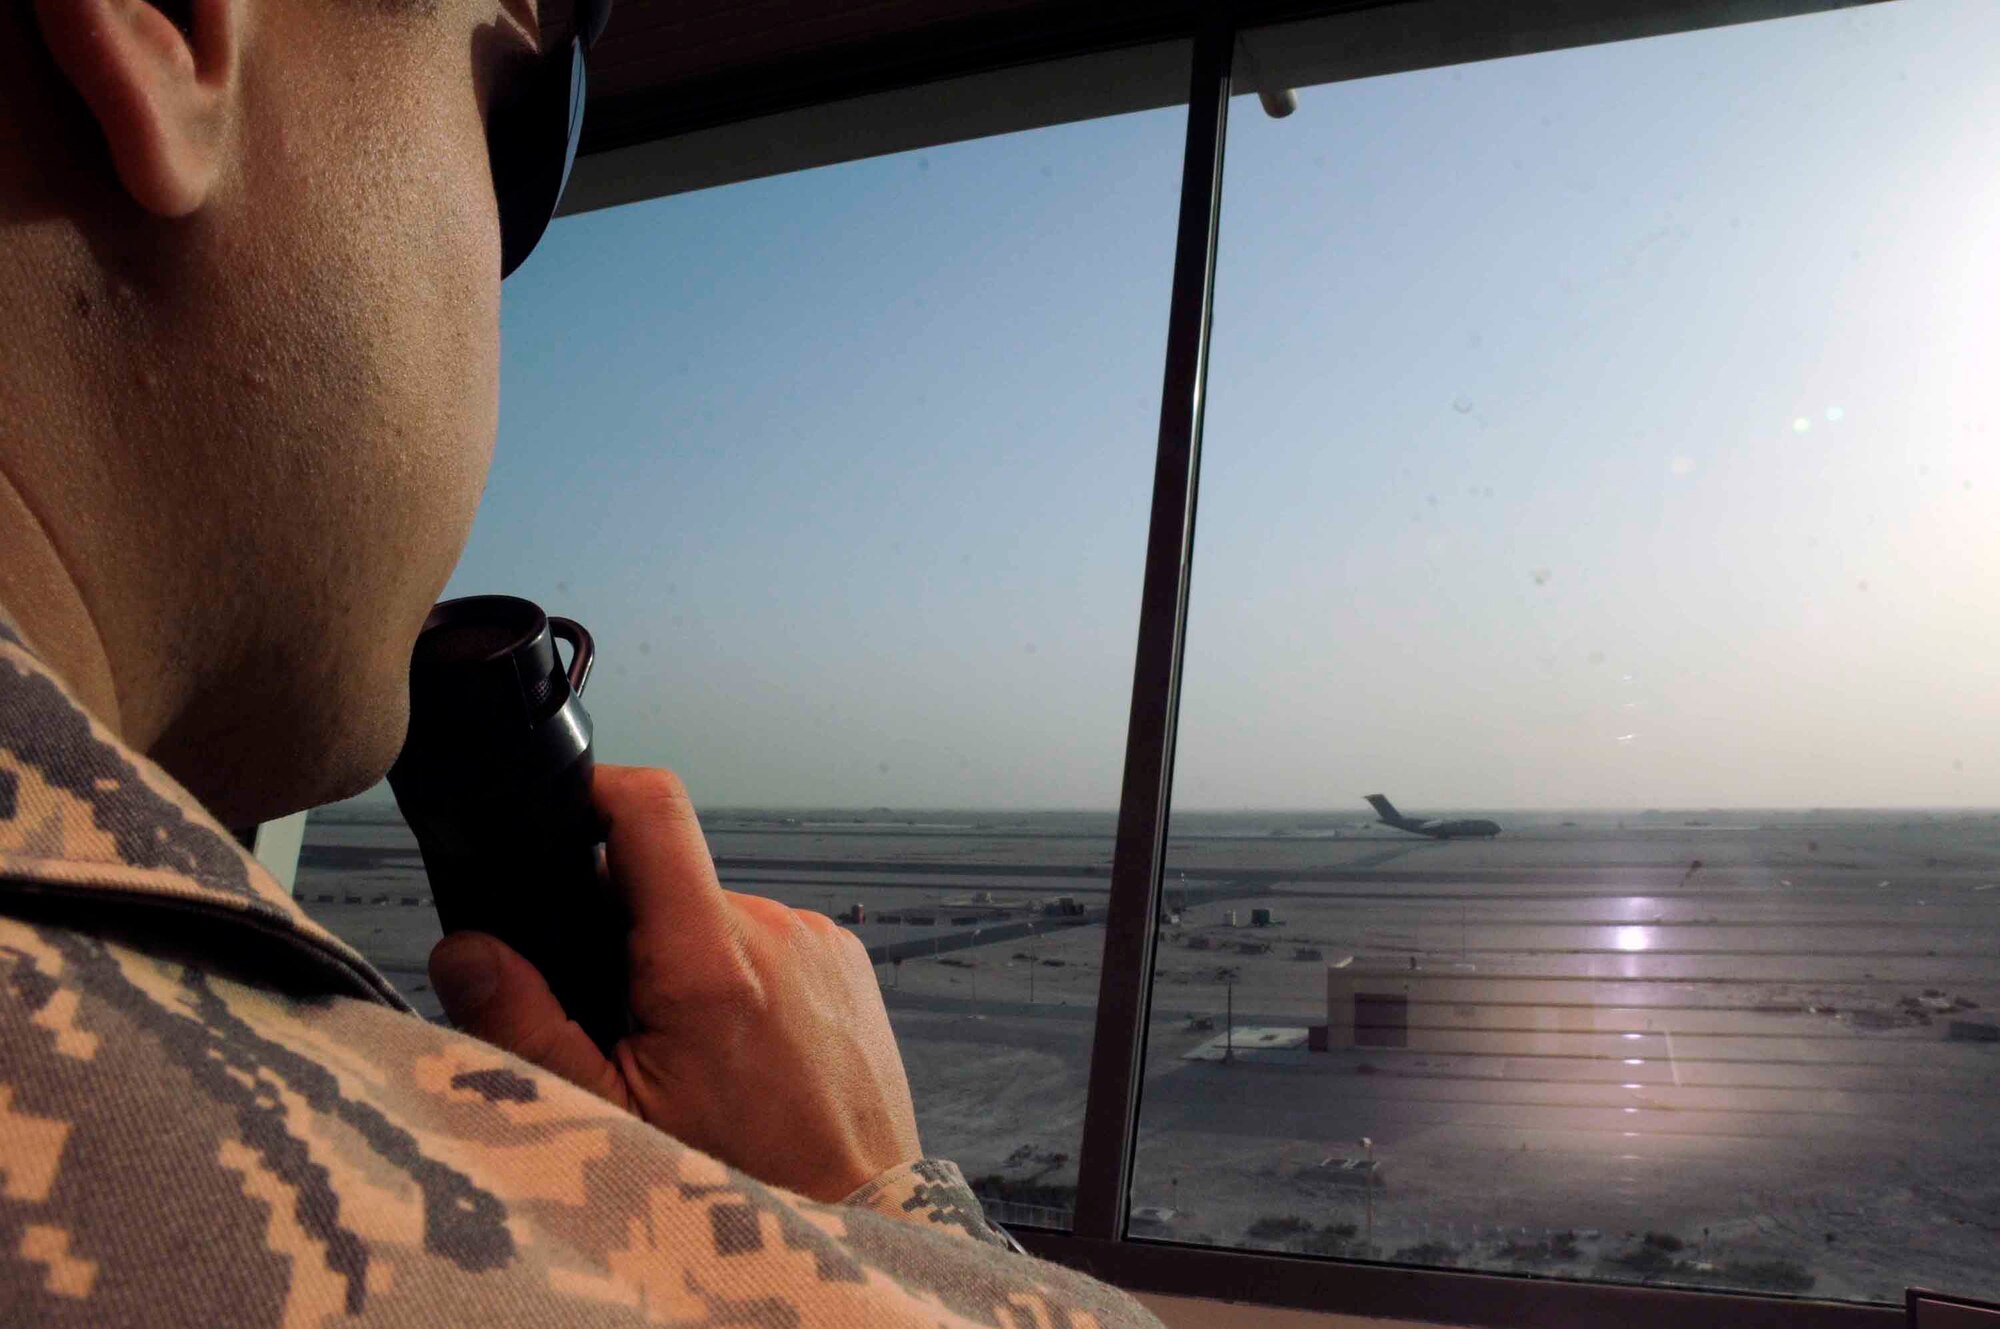 Senior Airman Eric Kindle, air traffic controller journeyman, communicates to aircraft taxiing on the runway through radio channels from the air traffic control tower. (U.S. Air Force photo/Senior Airman Domonique Simmons)